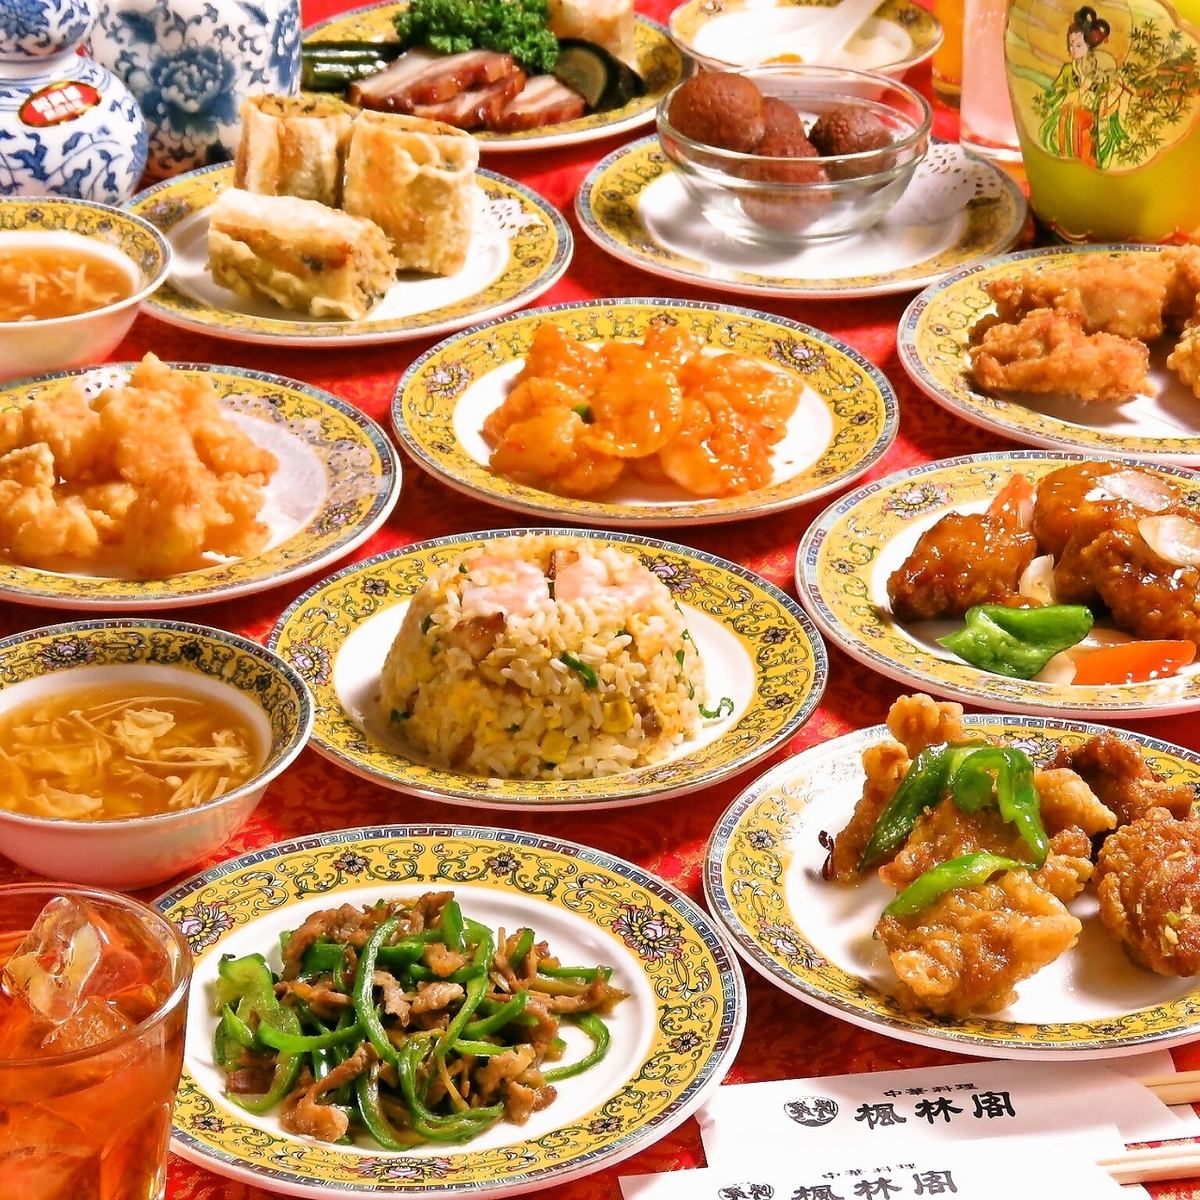 Order buffet with 50 types of alcohol or soft drink! 5,000 yen